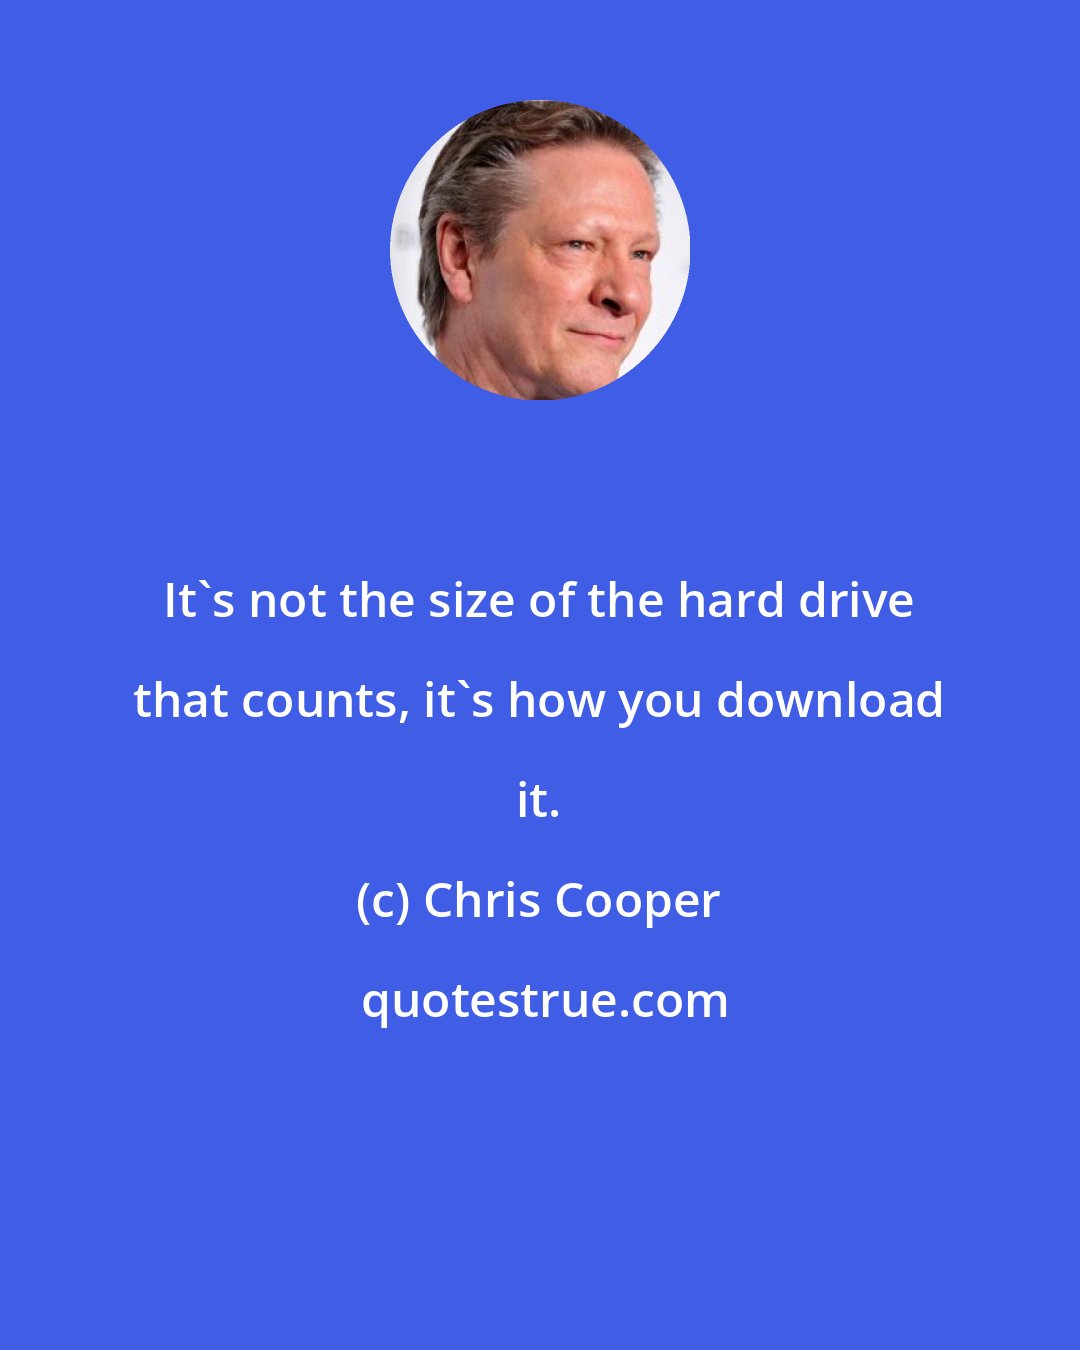 Chris Cooper: It's not the size of the hard drive that counts, it's how you download it.